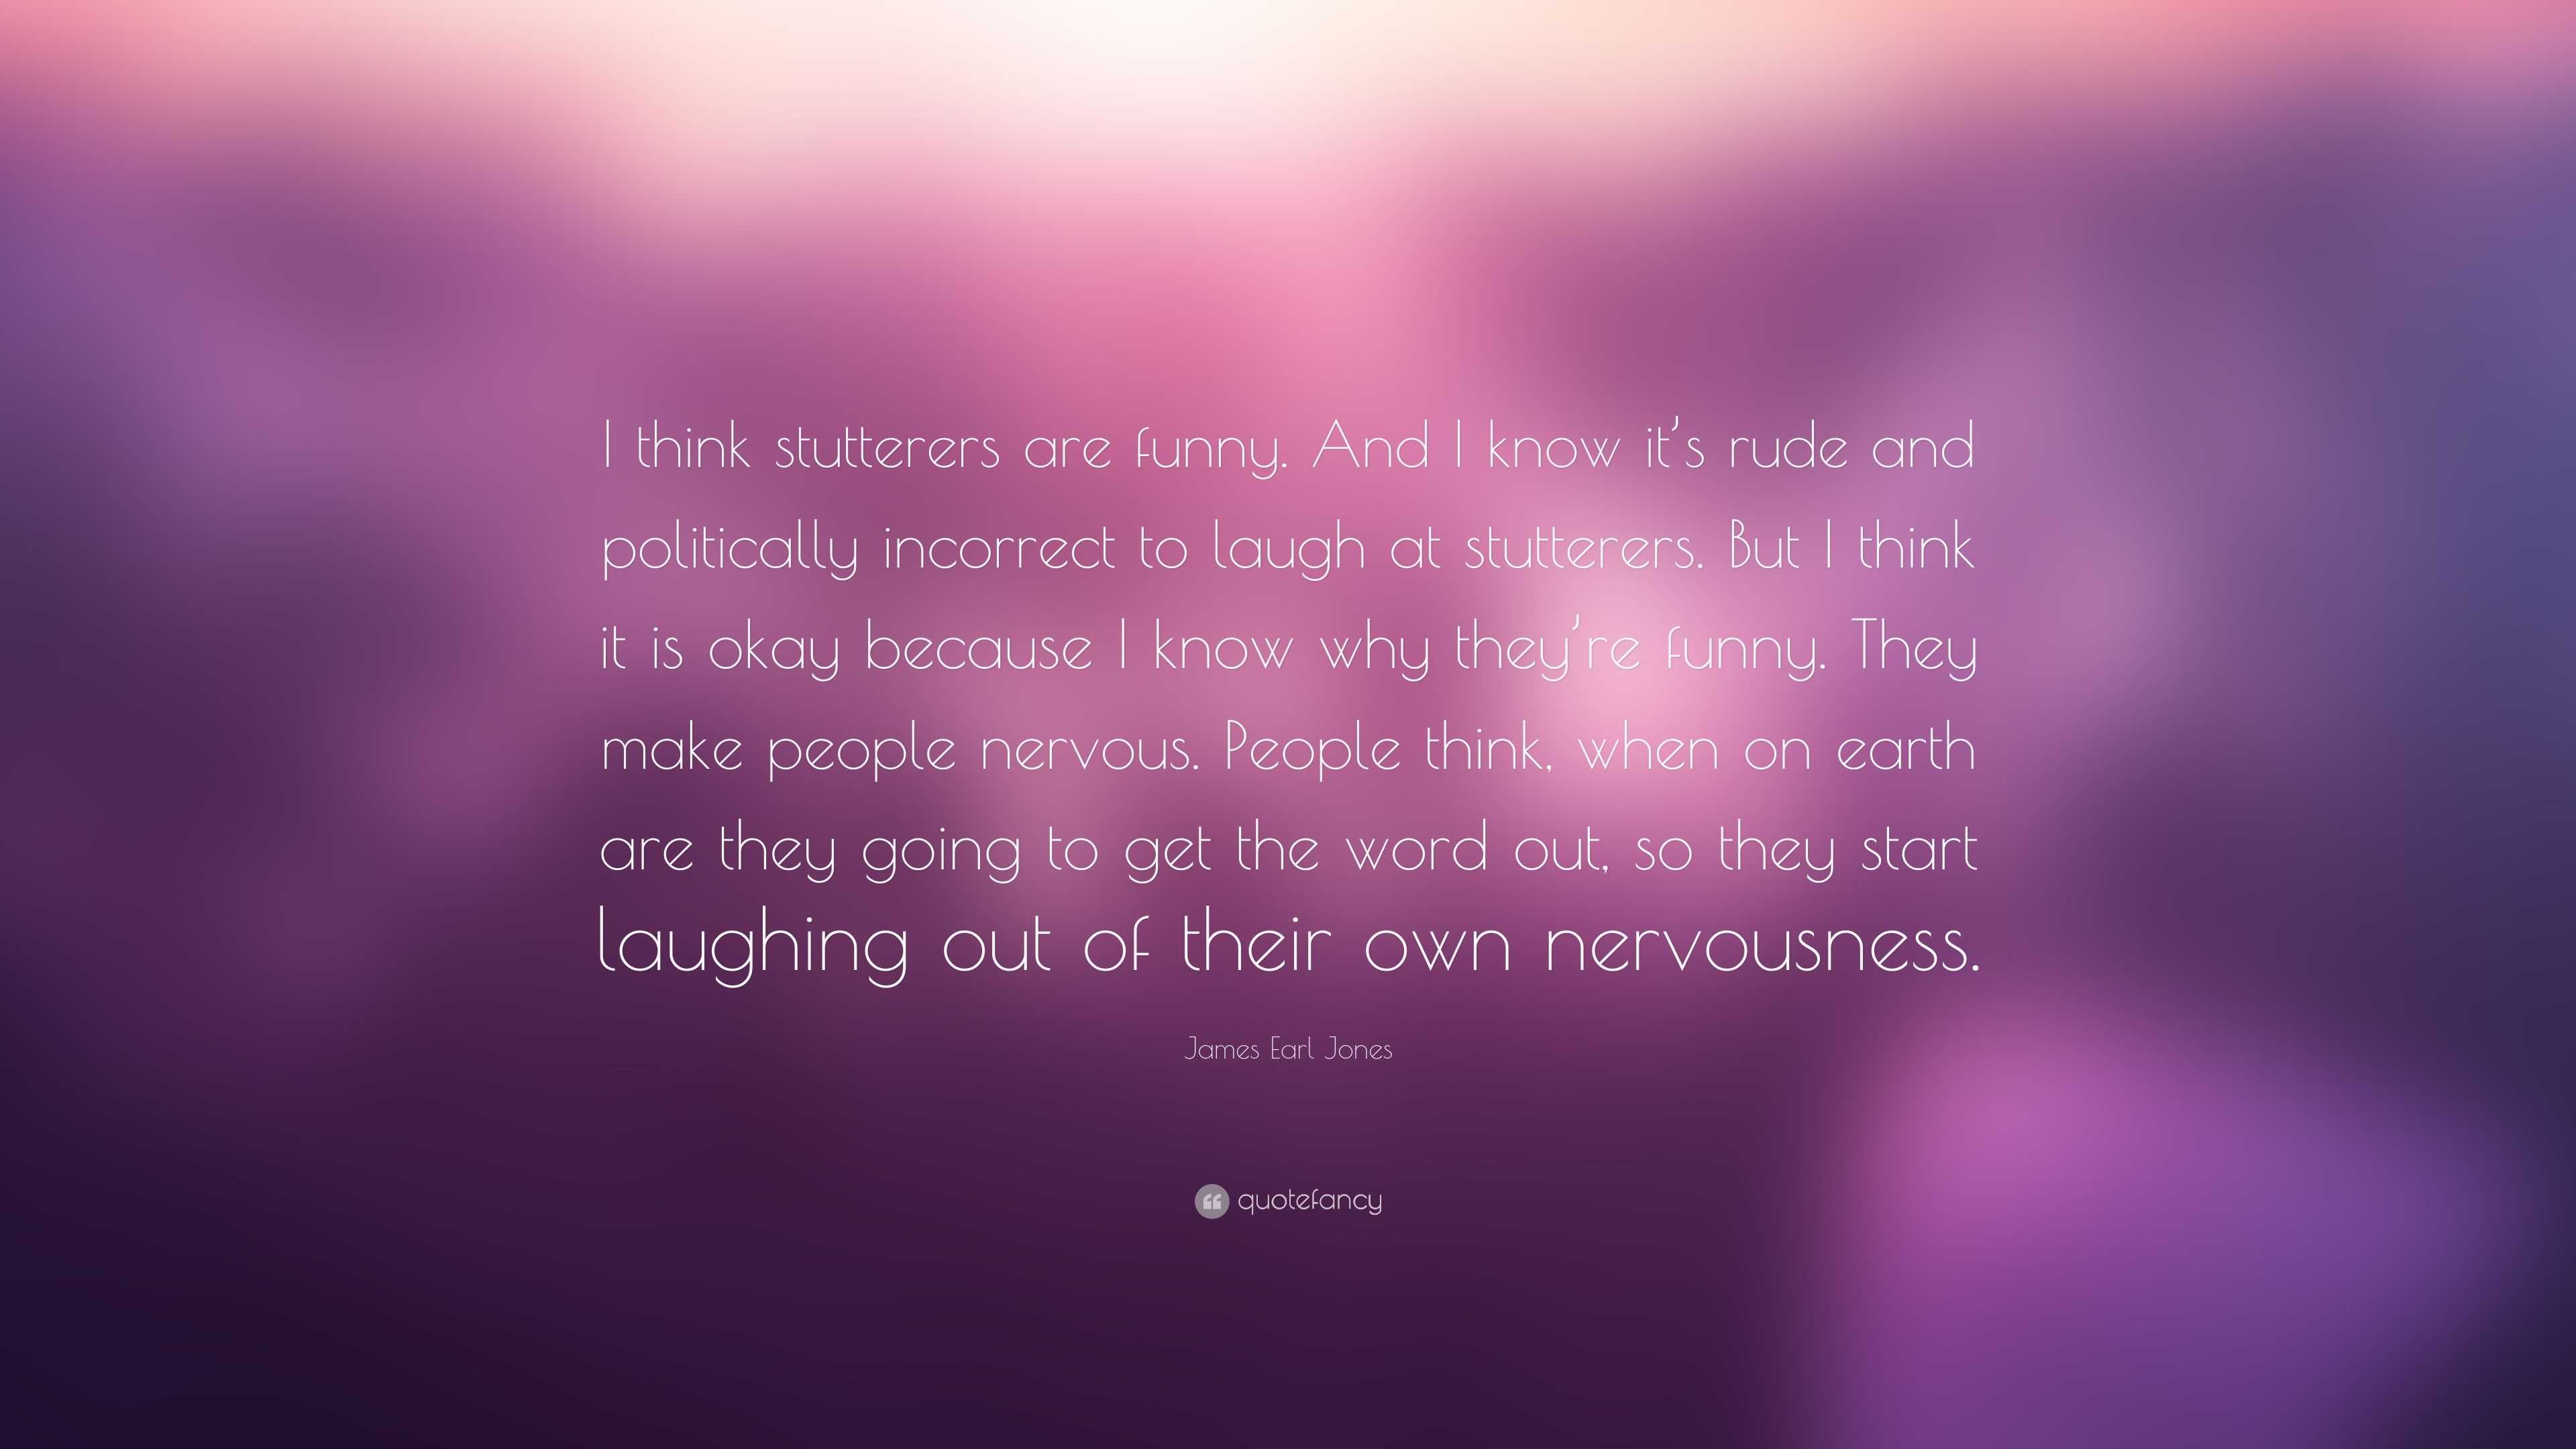 James Earl Jones Quote: “I think stutterers are funny. And I know it’s ...